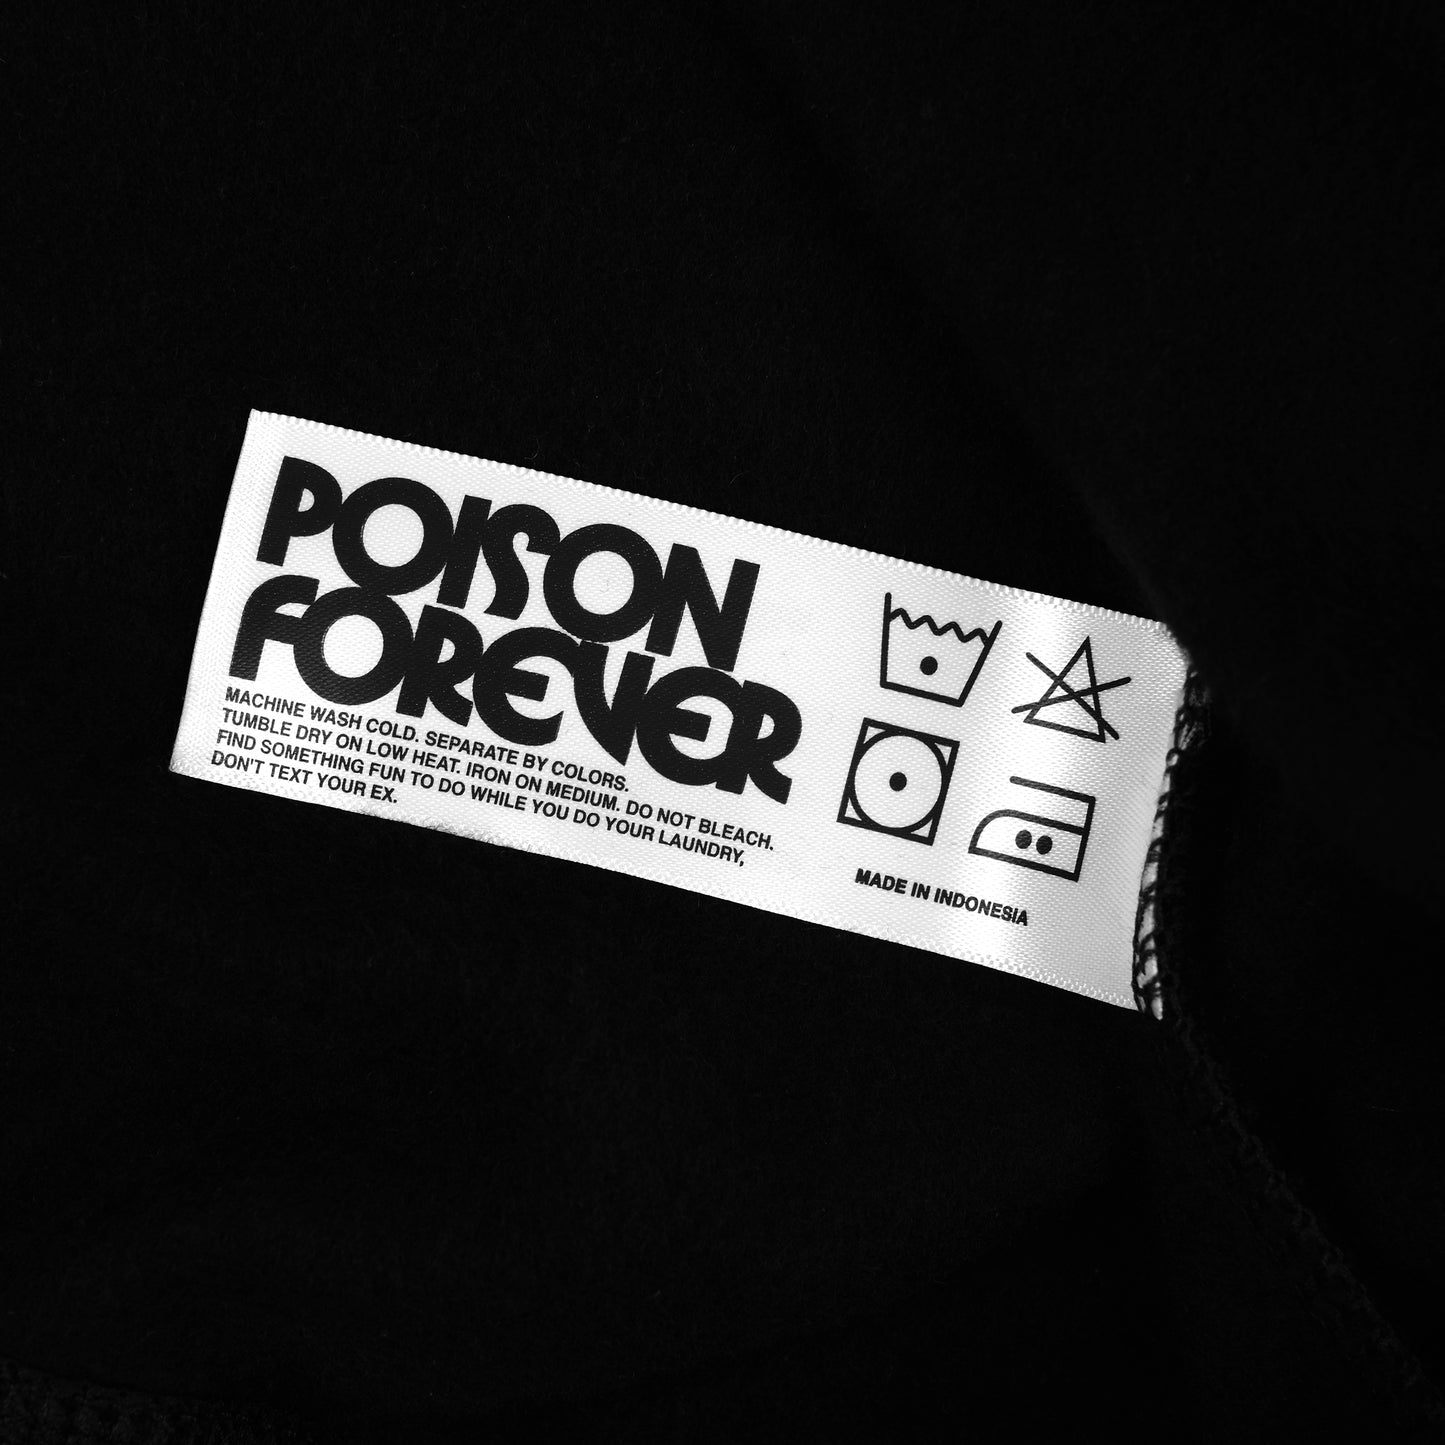 POISON FOREVER BOUQUET FLOWERS LOGO BLACK HOODIE